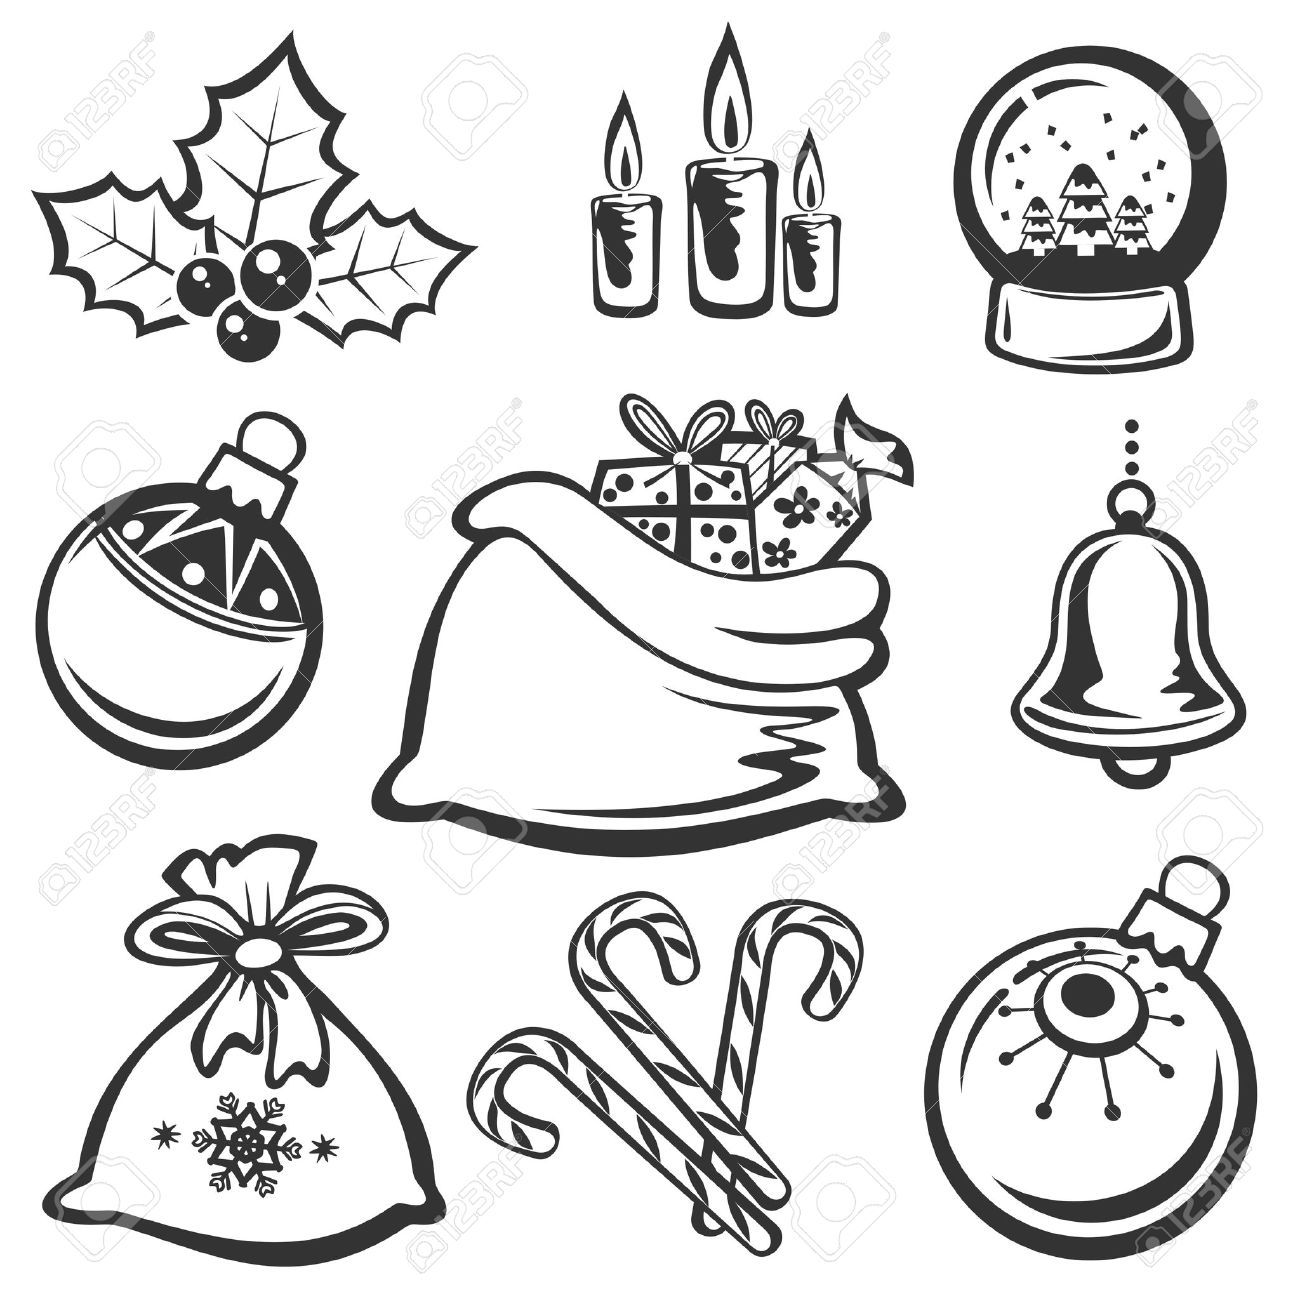 christmas-symbols-clip-art-black-and-white-20-free-cliparts-download